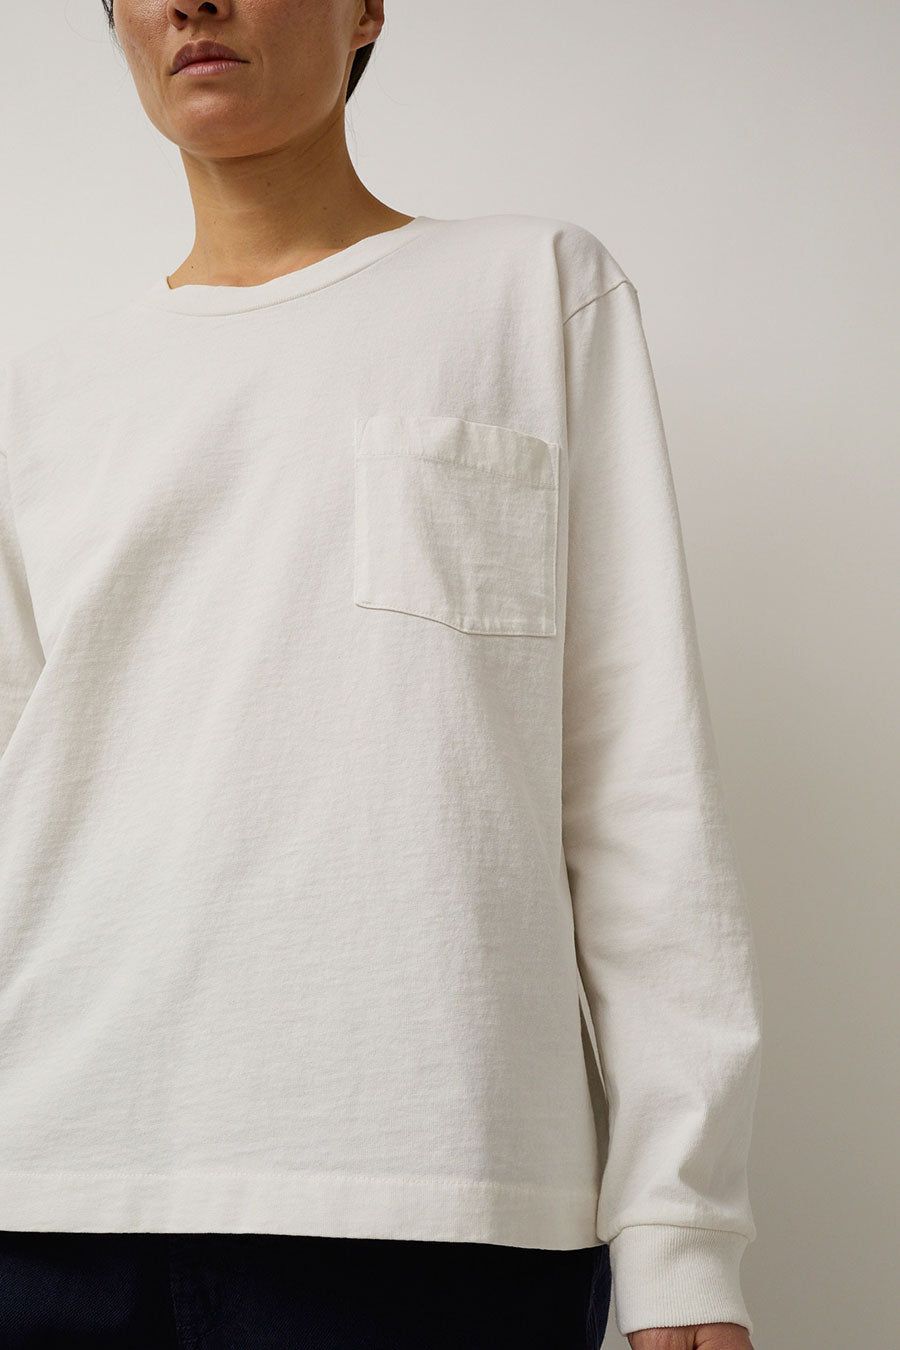 B Sides Long Sleeve Pocket Tee in Snow White